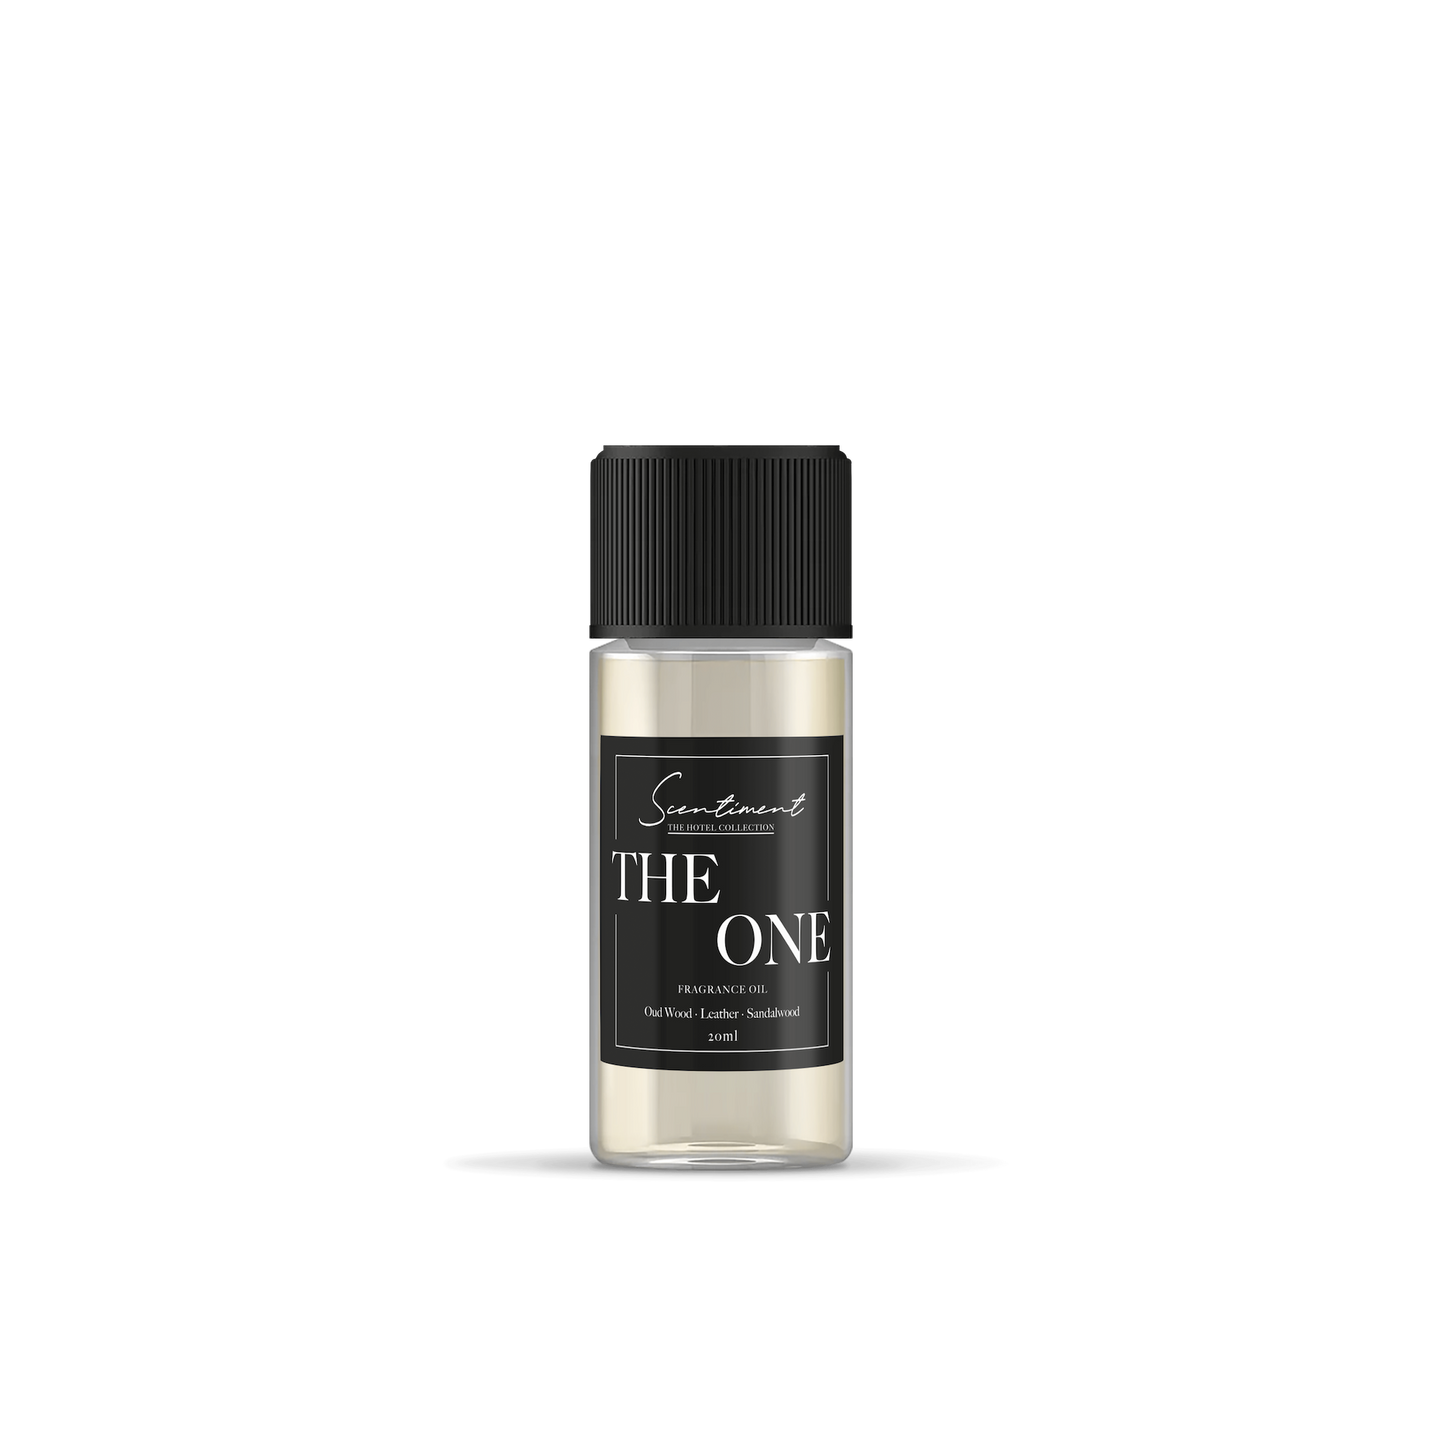 The One Fragrance Oil, inspired by One® Hotel in Miami, with notes of Wood, Leather, and Sandalwood.